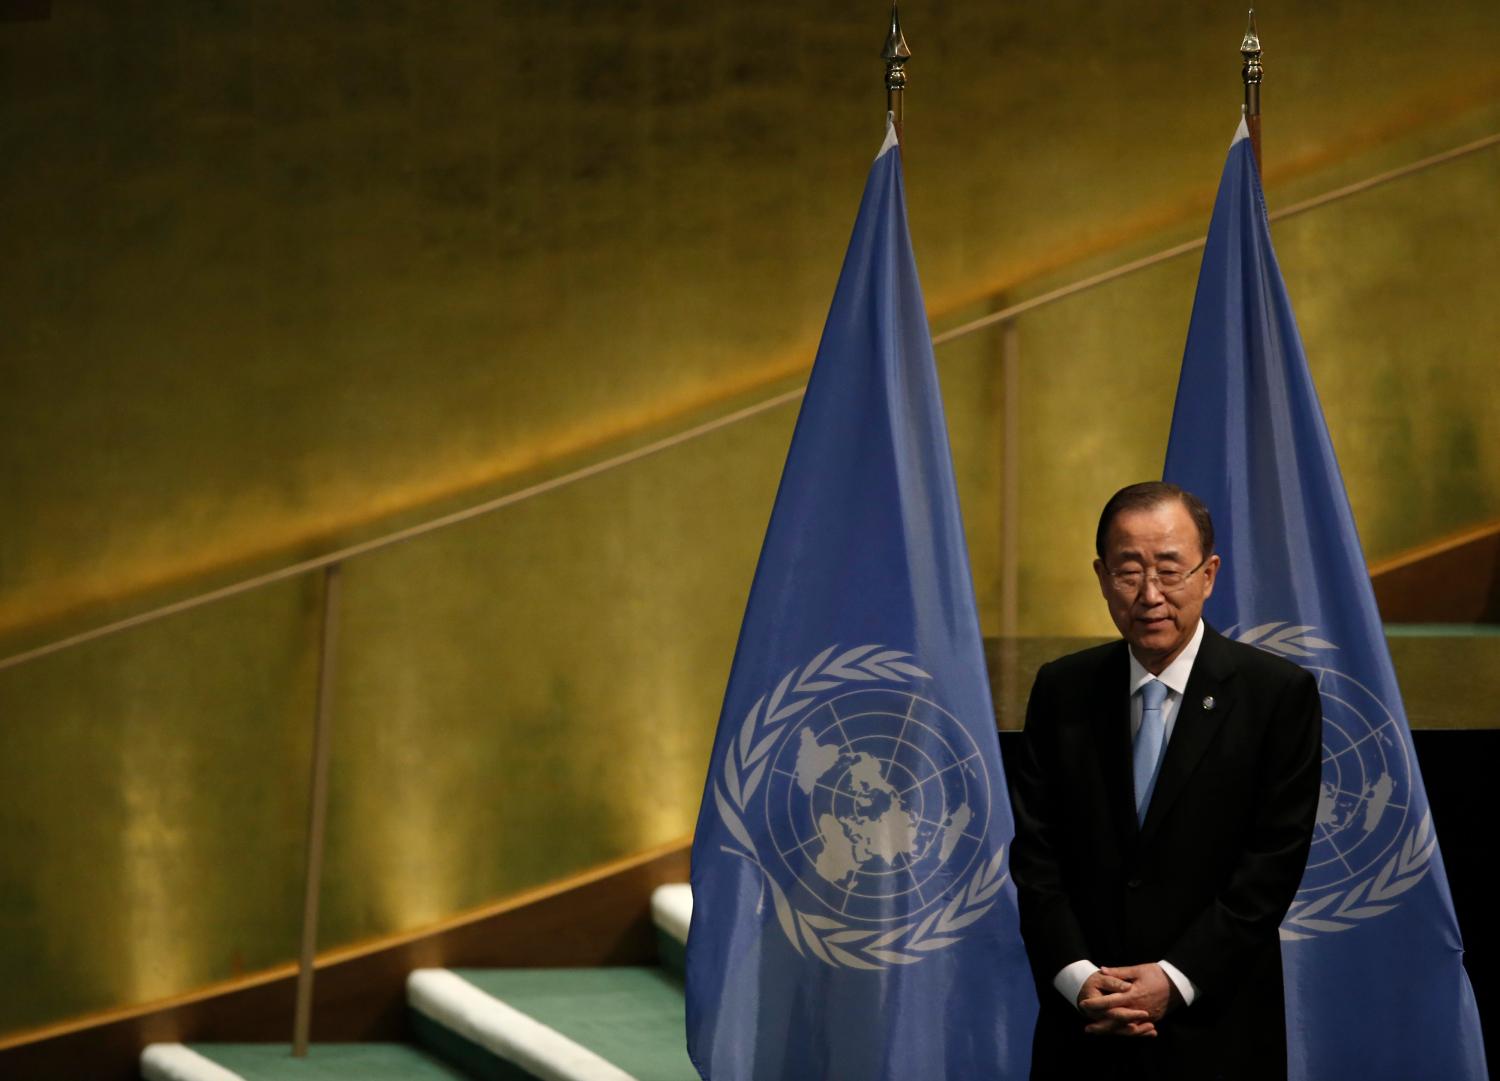 U.N. Secretary General Ban Ki-moon stands on the sidelines at a "High-Level Event on Entry into Force of the Paris Agreement on Climate Change" meeting at United Nations headquarters in the Manhattan borough of New York, U.S., September 21, 2016. REUTERS/Mike Segar